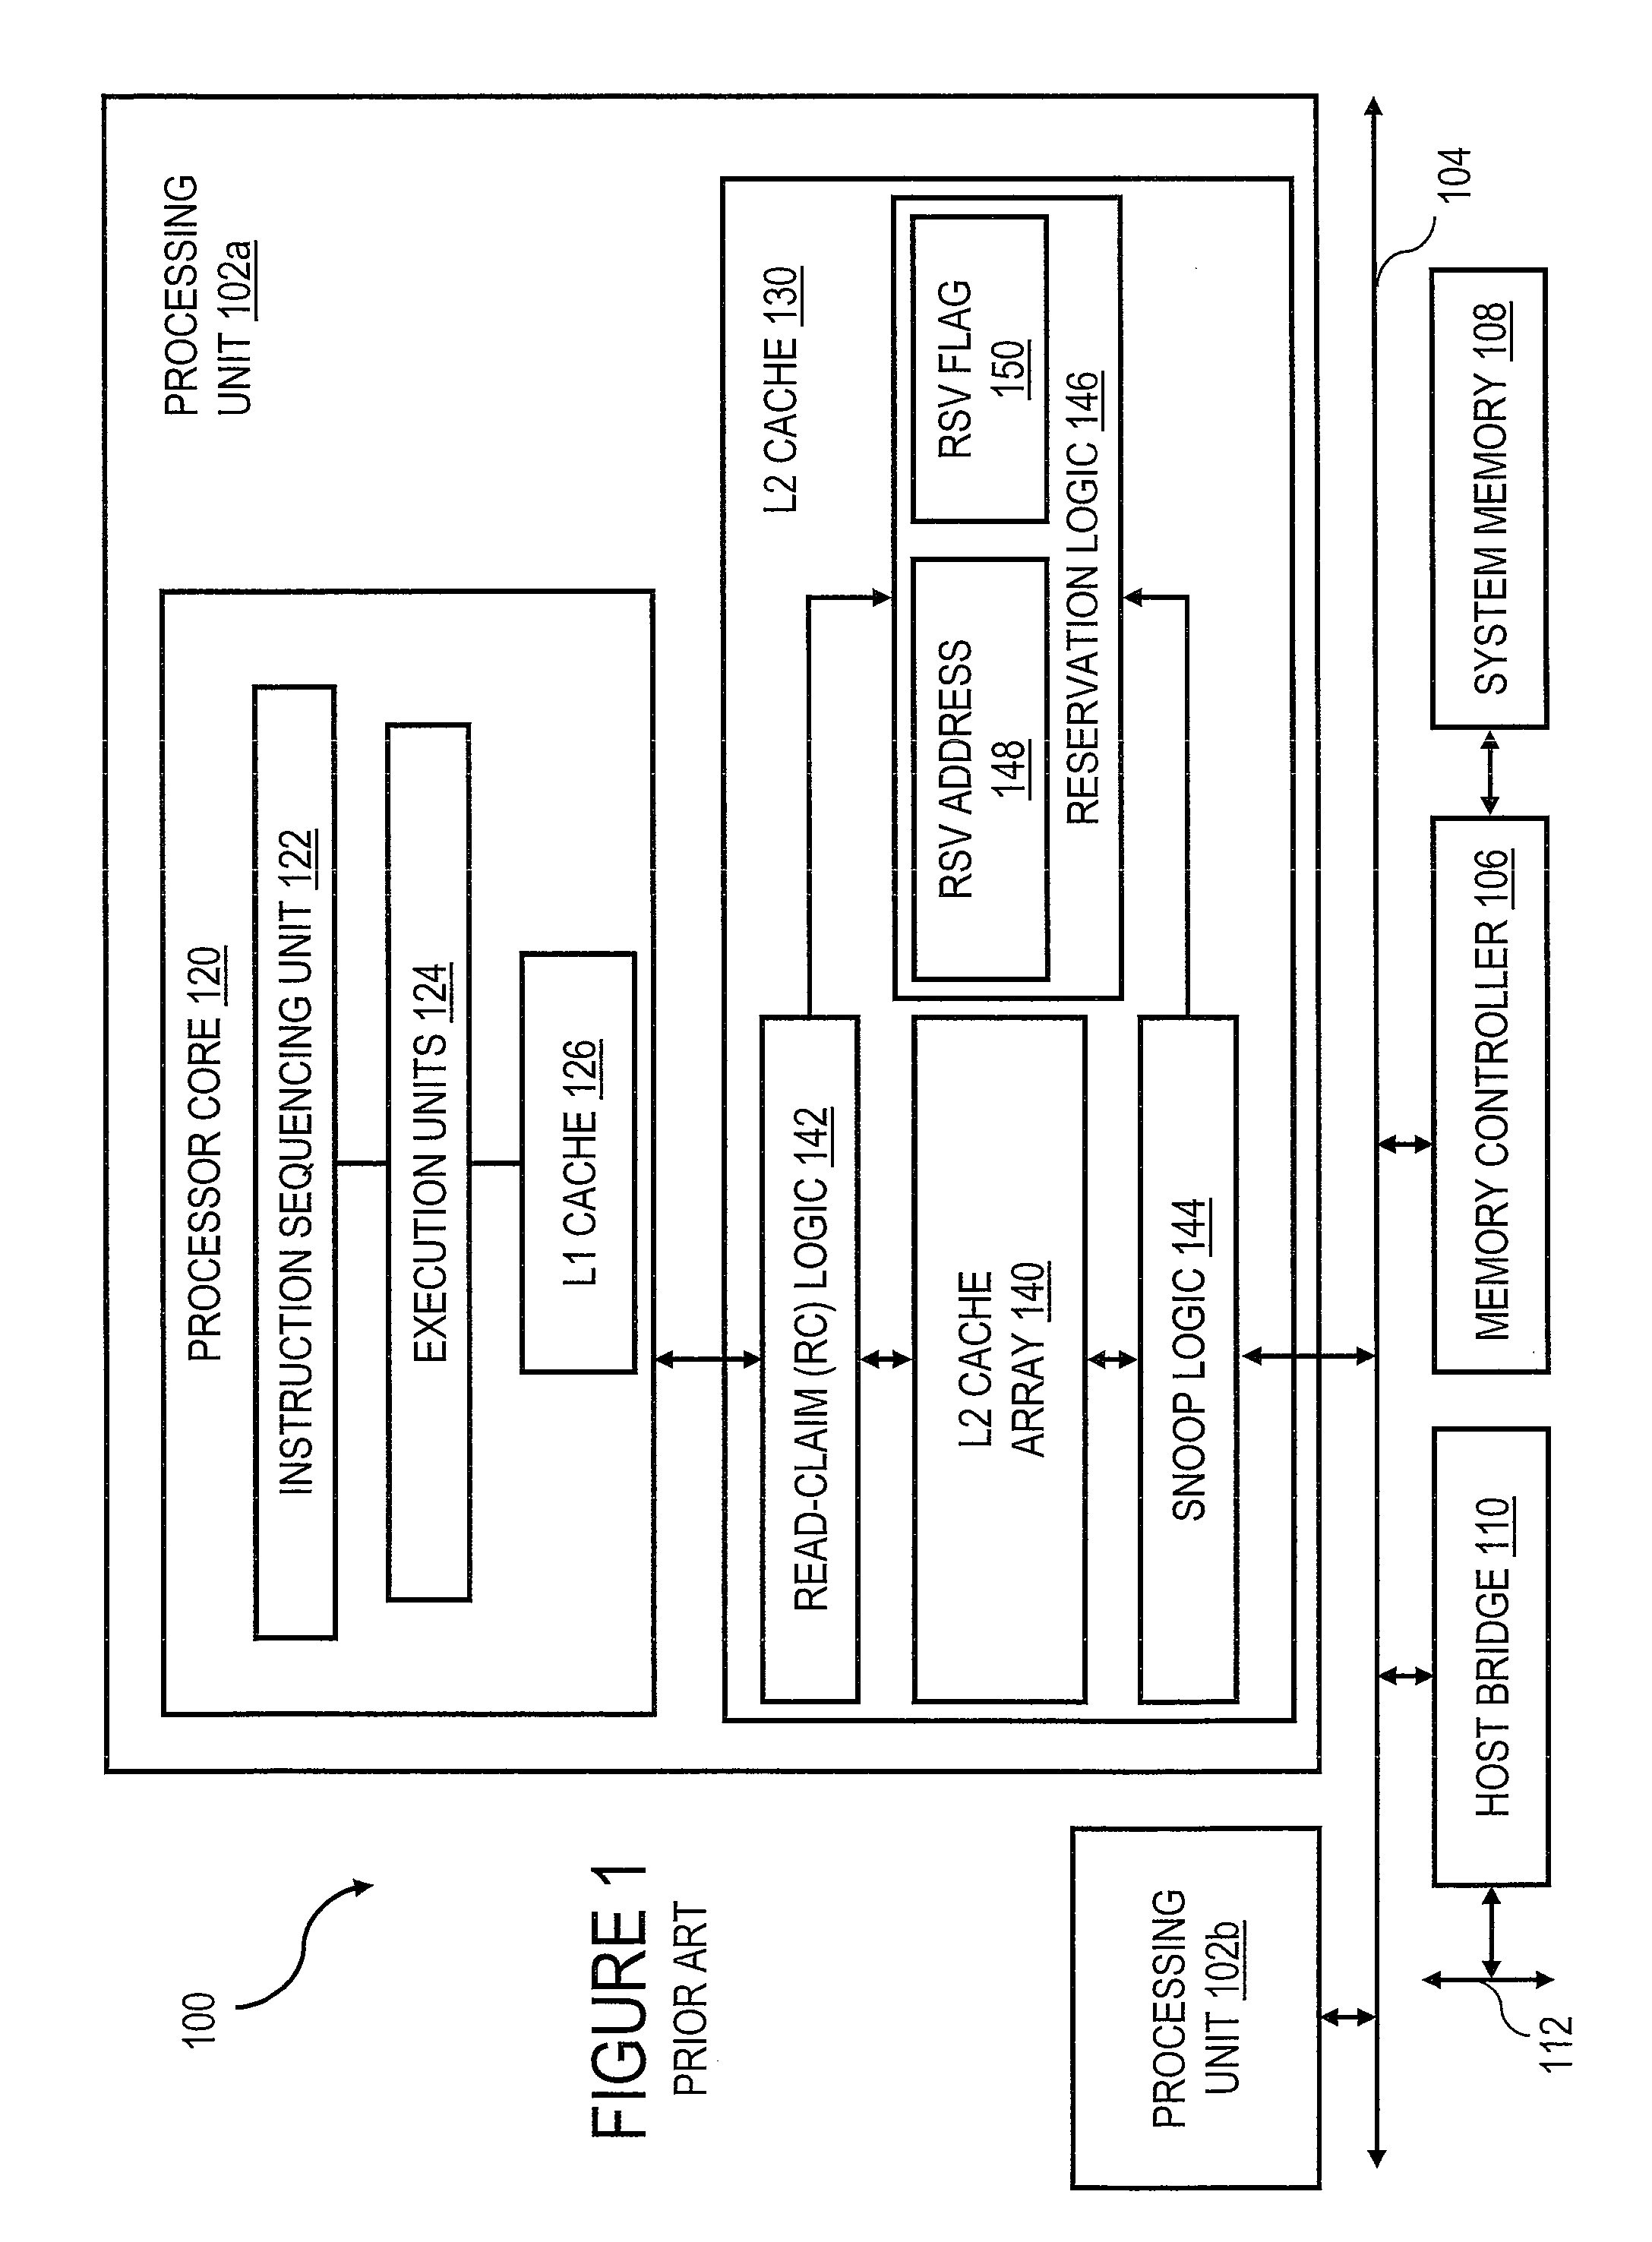 Synchronizing access to data in shared memory via upper level cache queuing